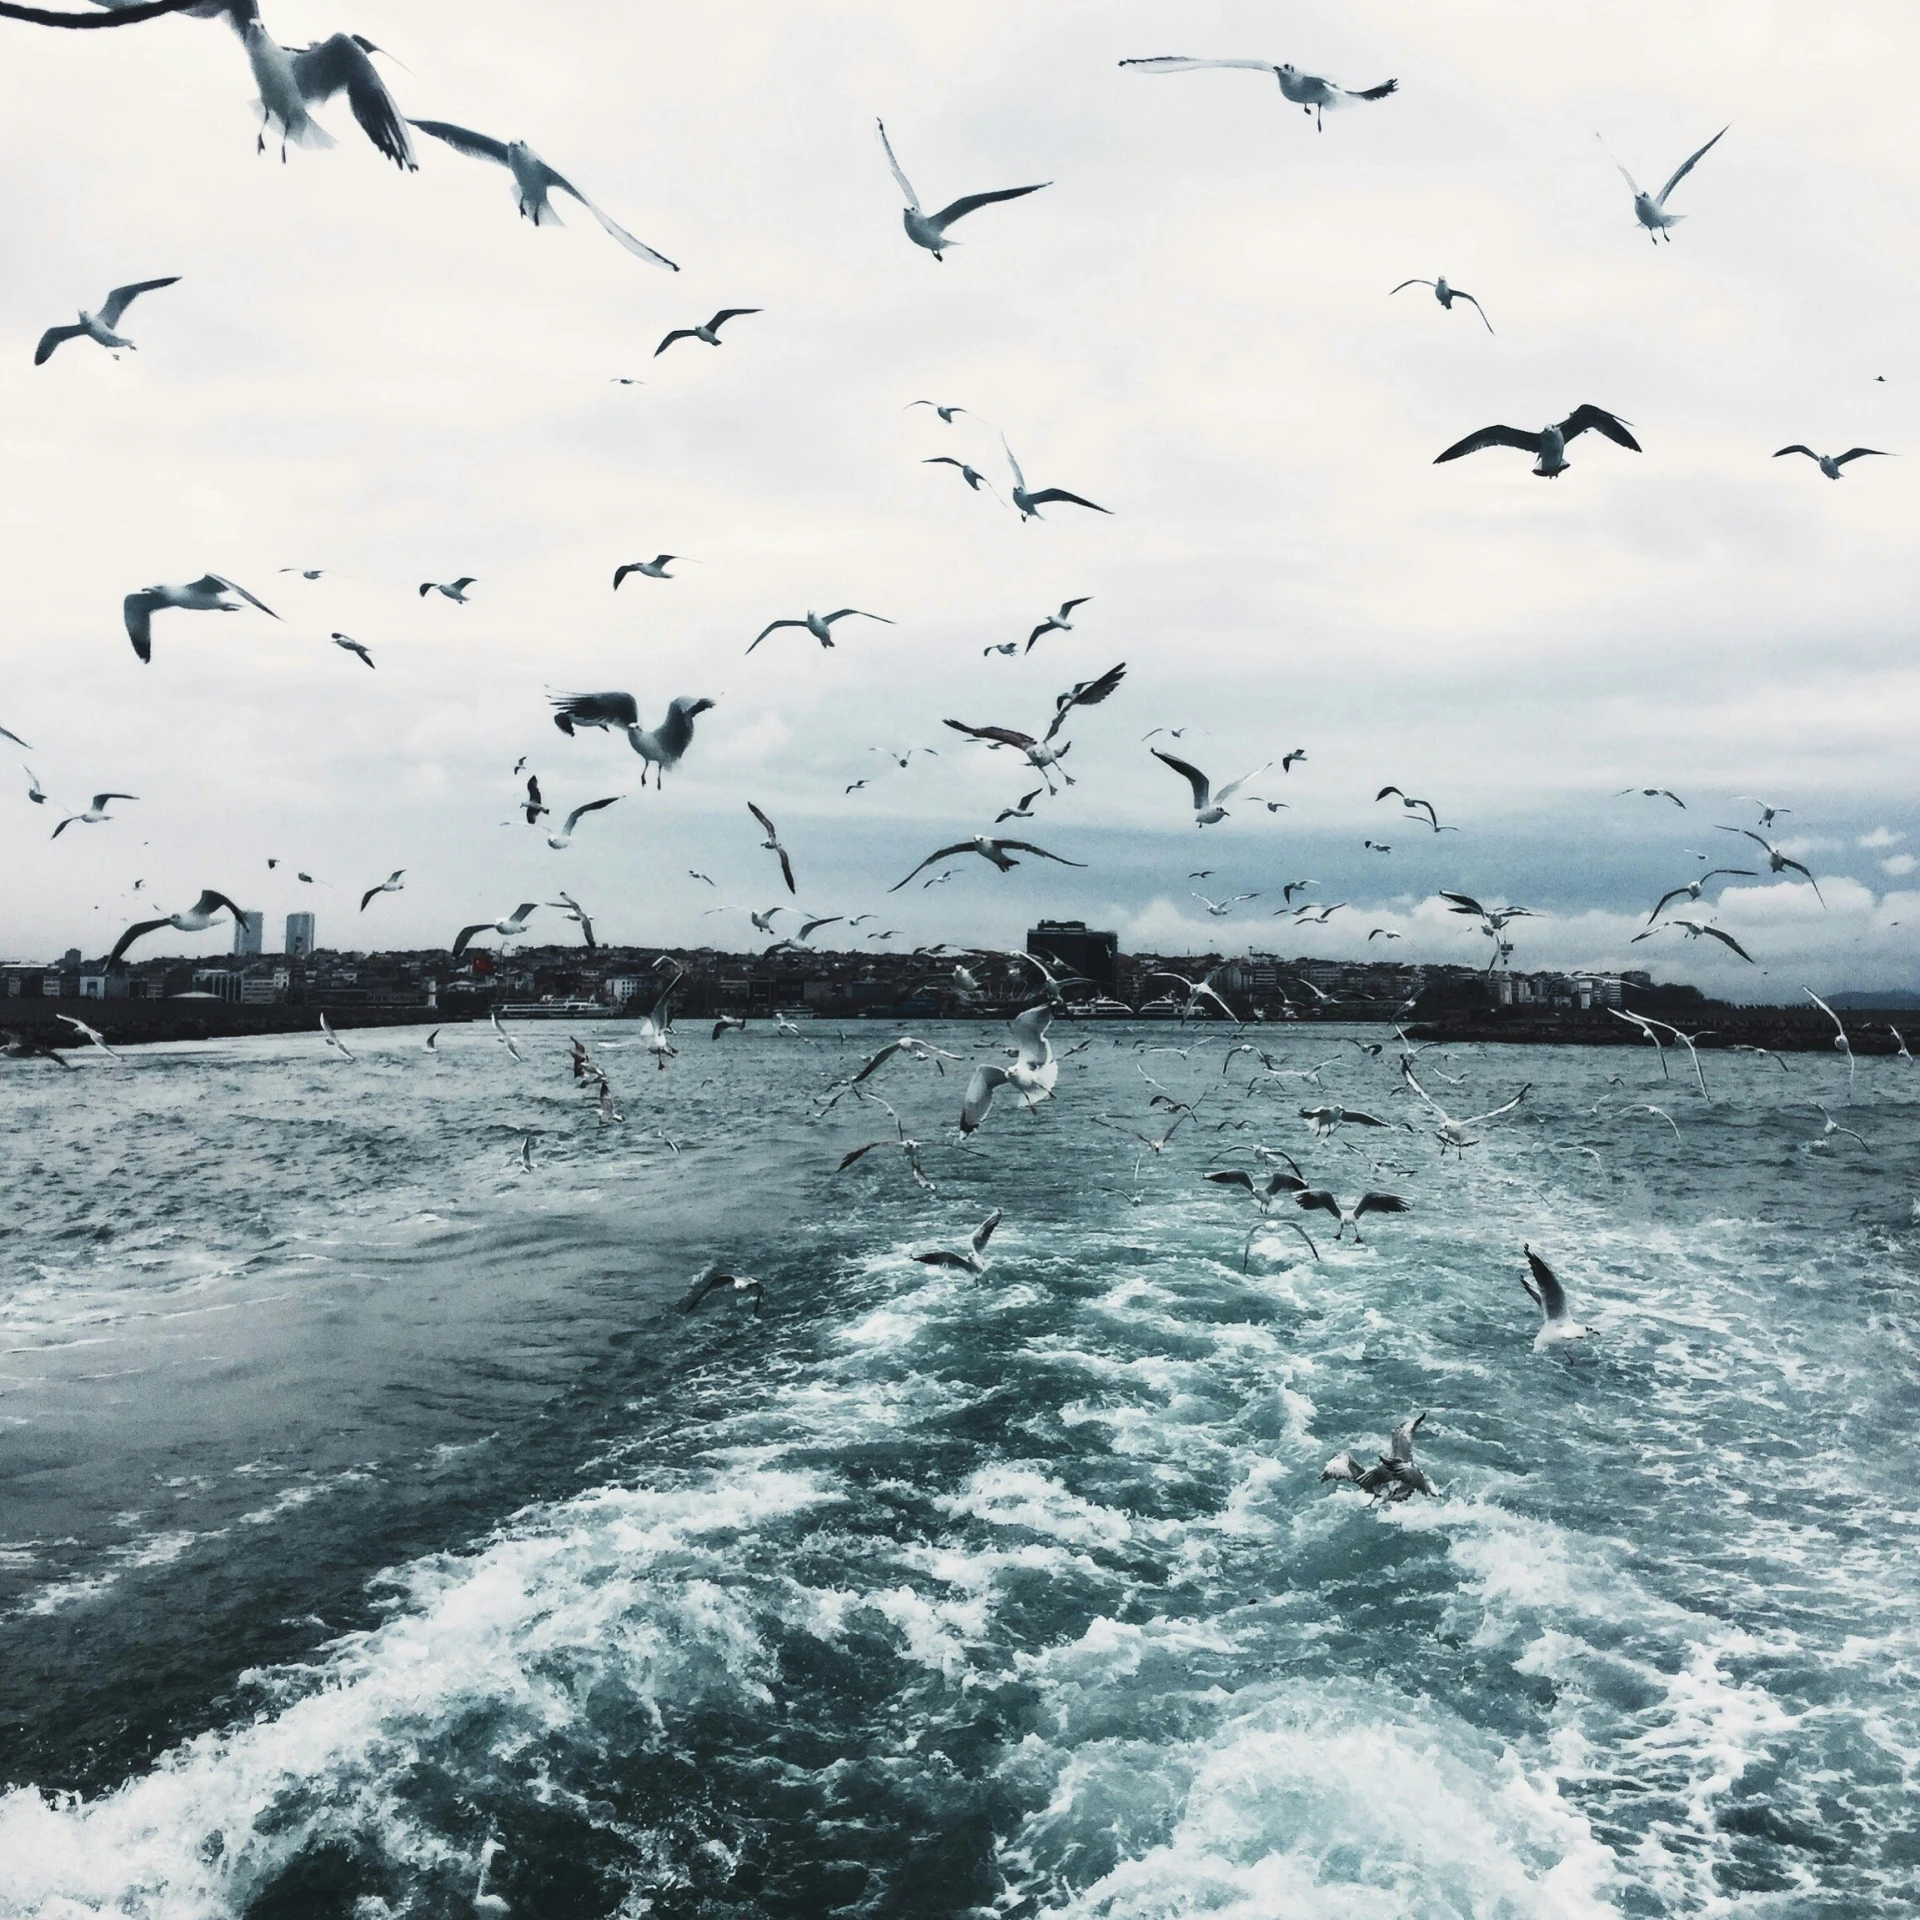 a flock of seagulls flying above the water of the ocean